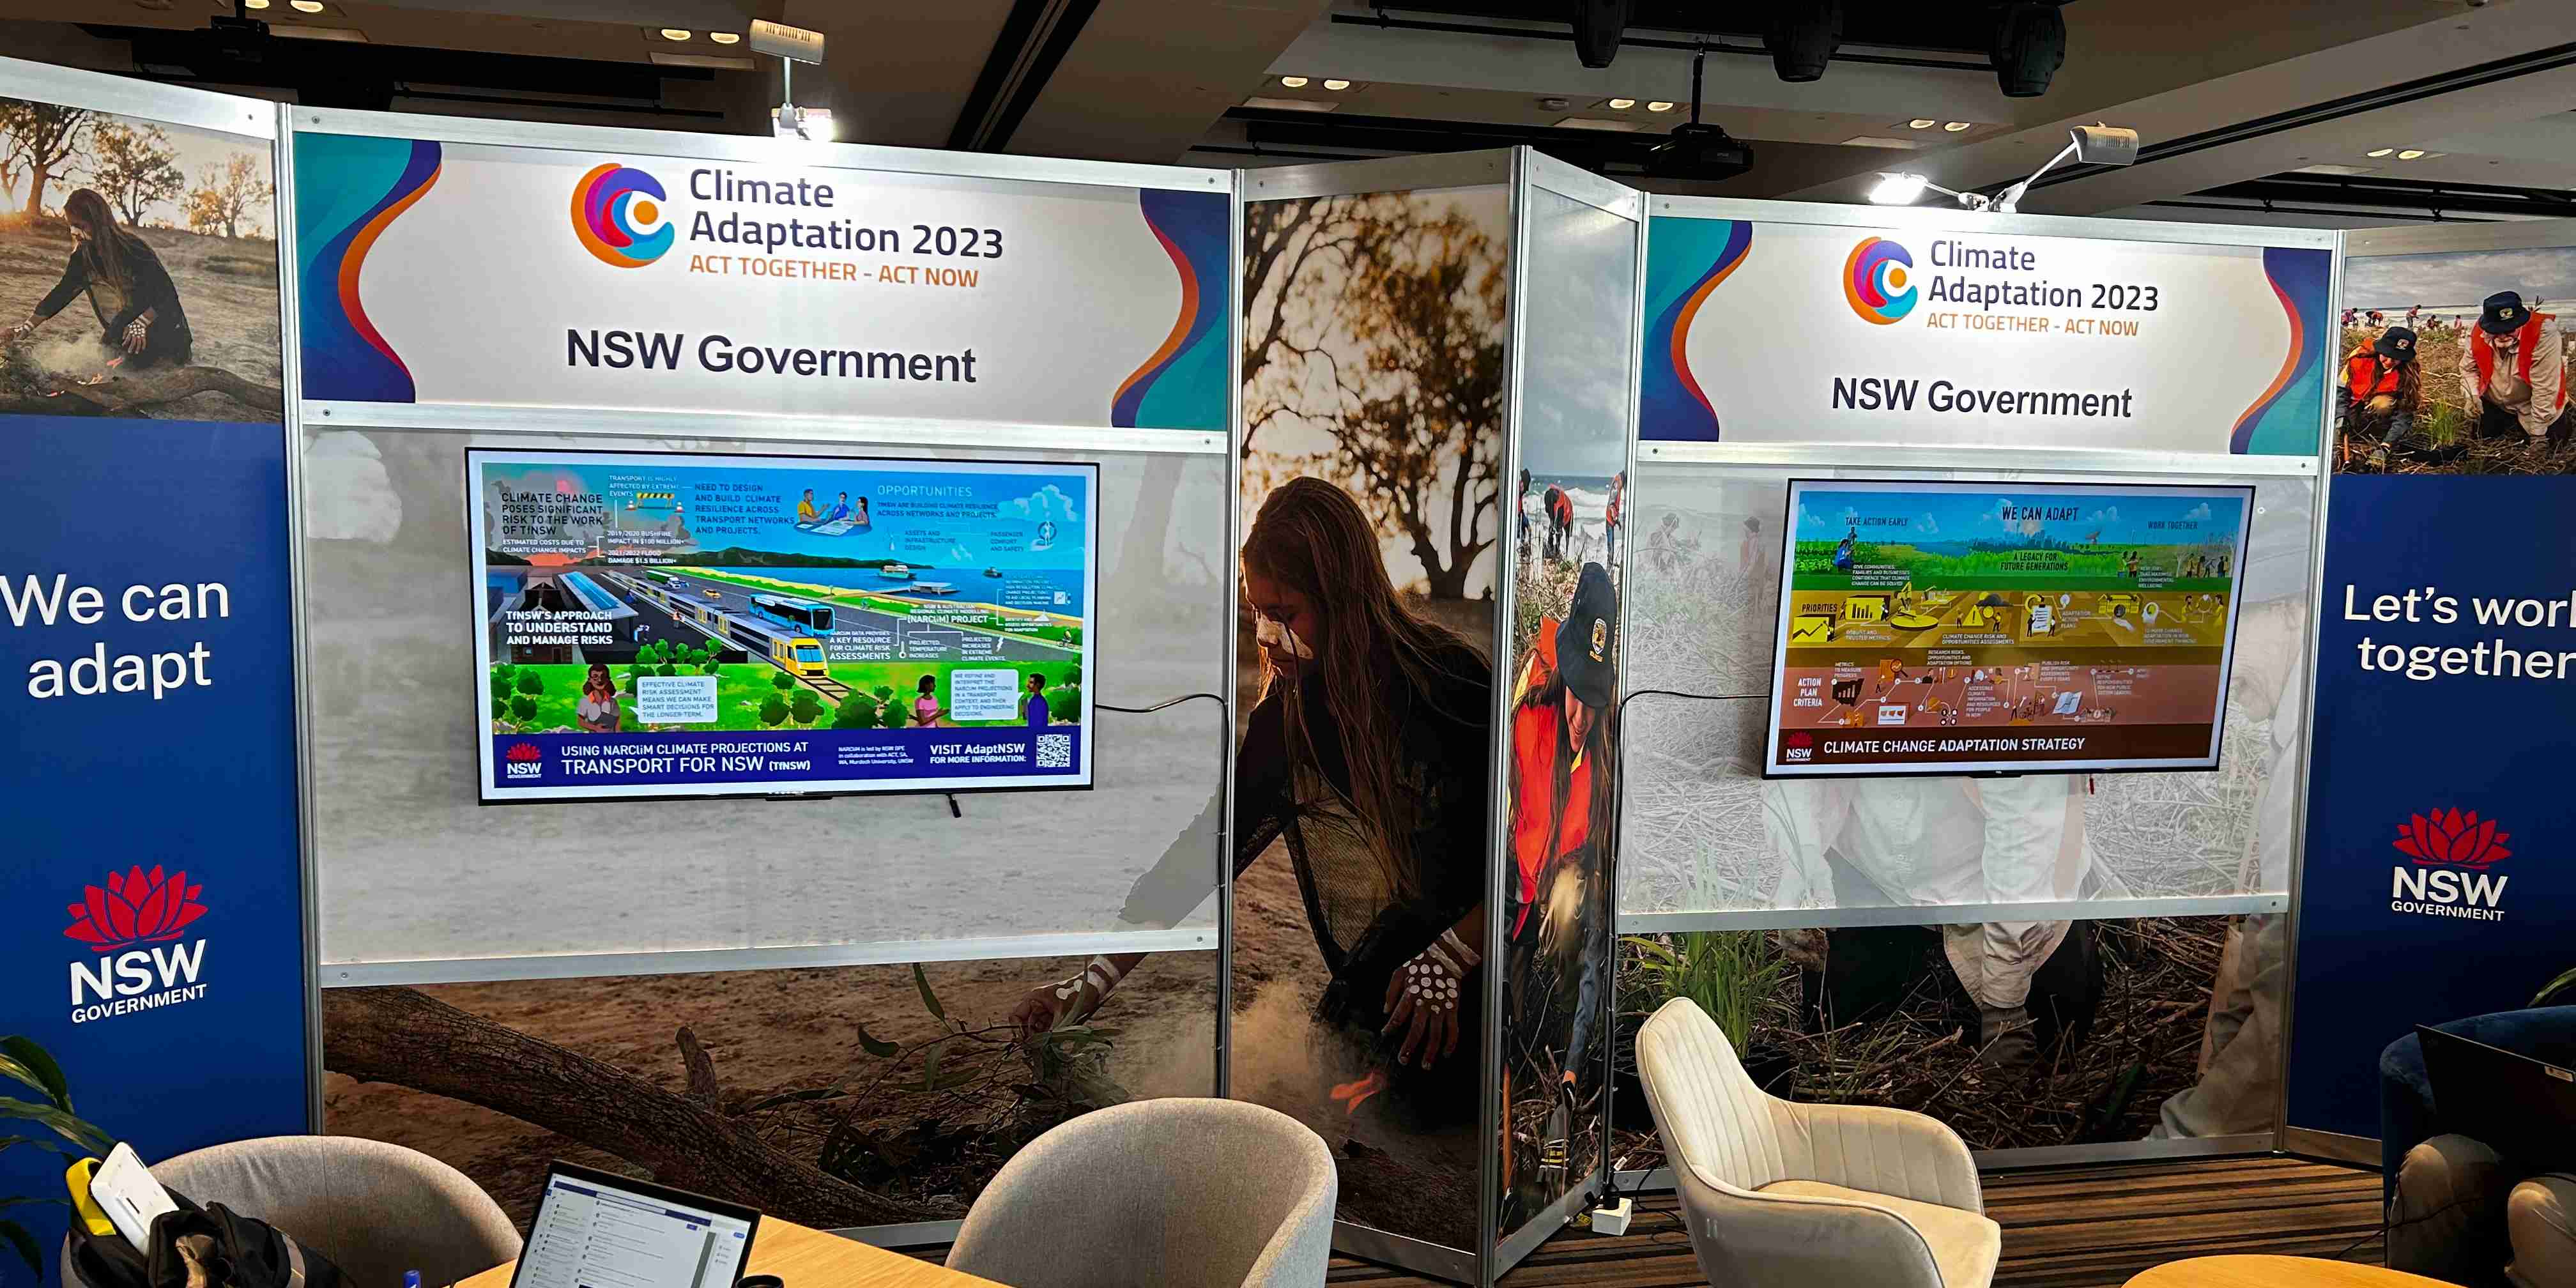 A photograph of the AdaptNSW conference booth. It has two large LCD screens showing AdaptNSW related content and is surrounded by tables and chairs.